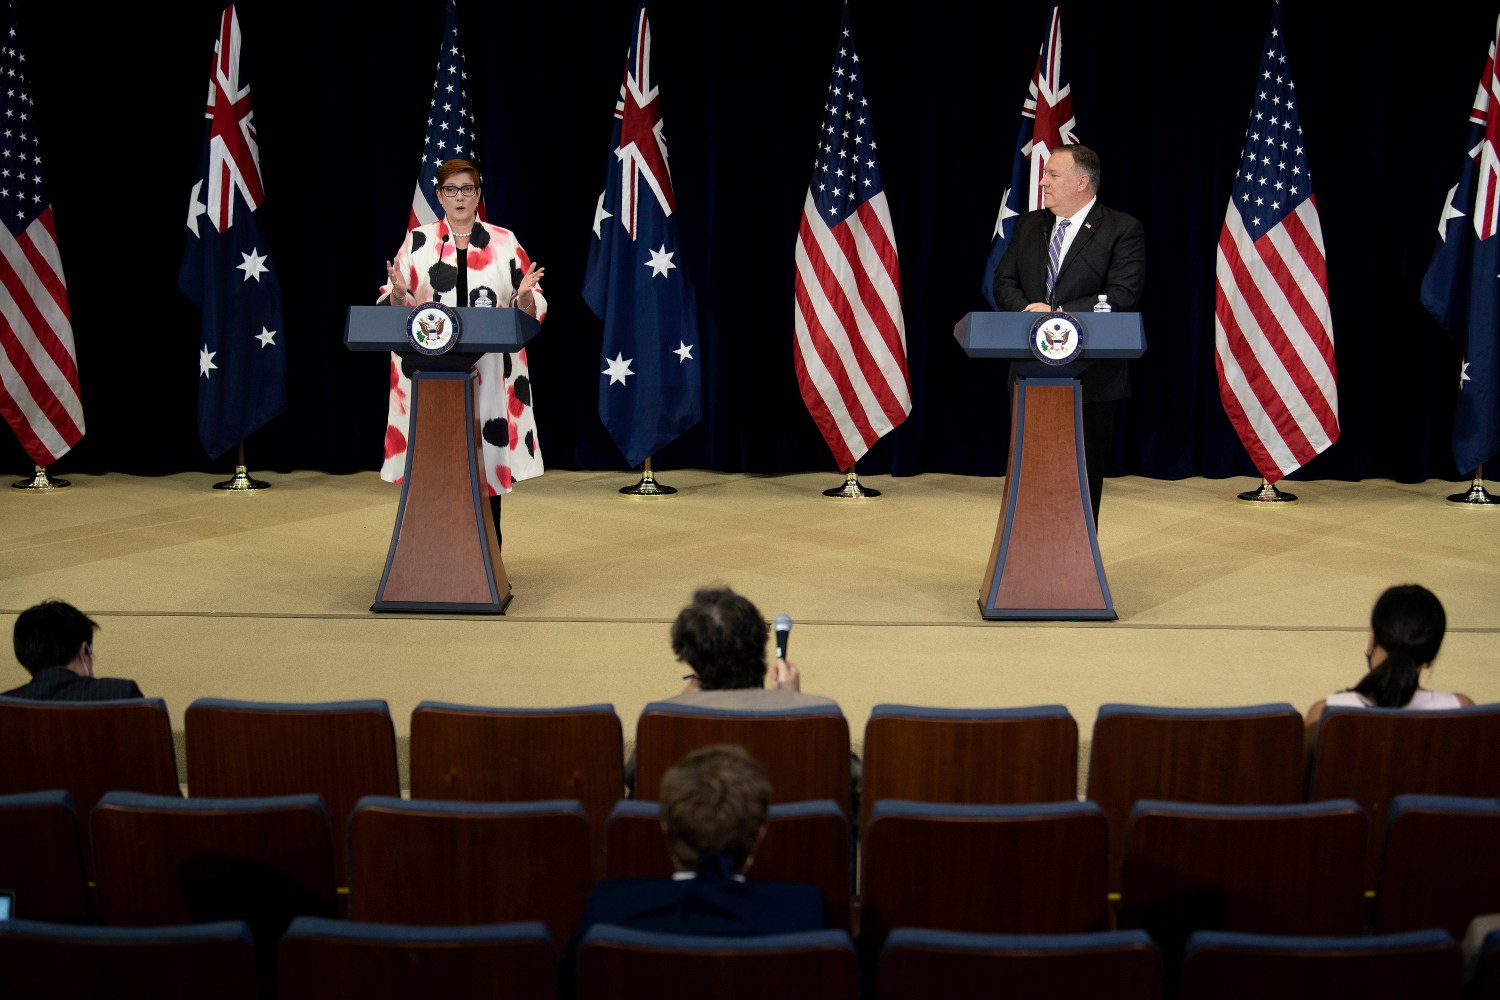 U.S. Secretary of State Mike Pompeo listens while Australia's Foreign Minister Marise Payne speaks during a news conference at the U.S. Department of State following the 30th AUSMIN in Washington, D.C. July 28, 2020. Brendan Smialowski/Pool via REUTERS